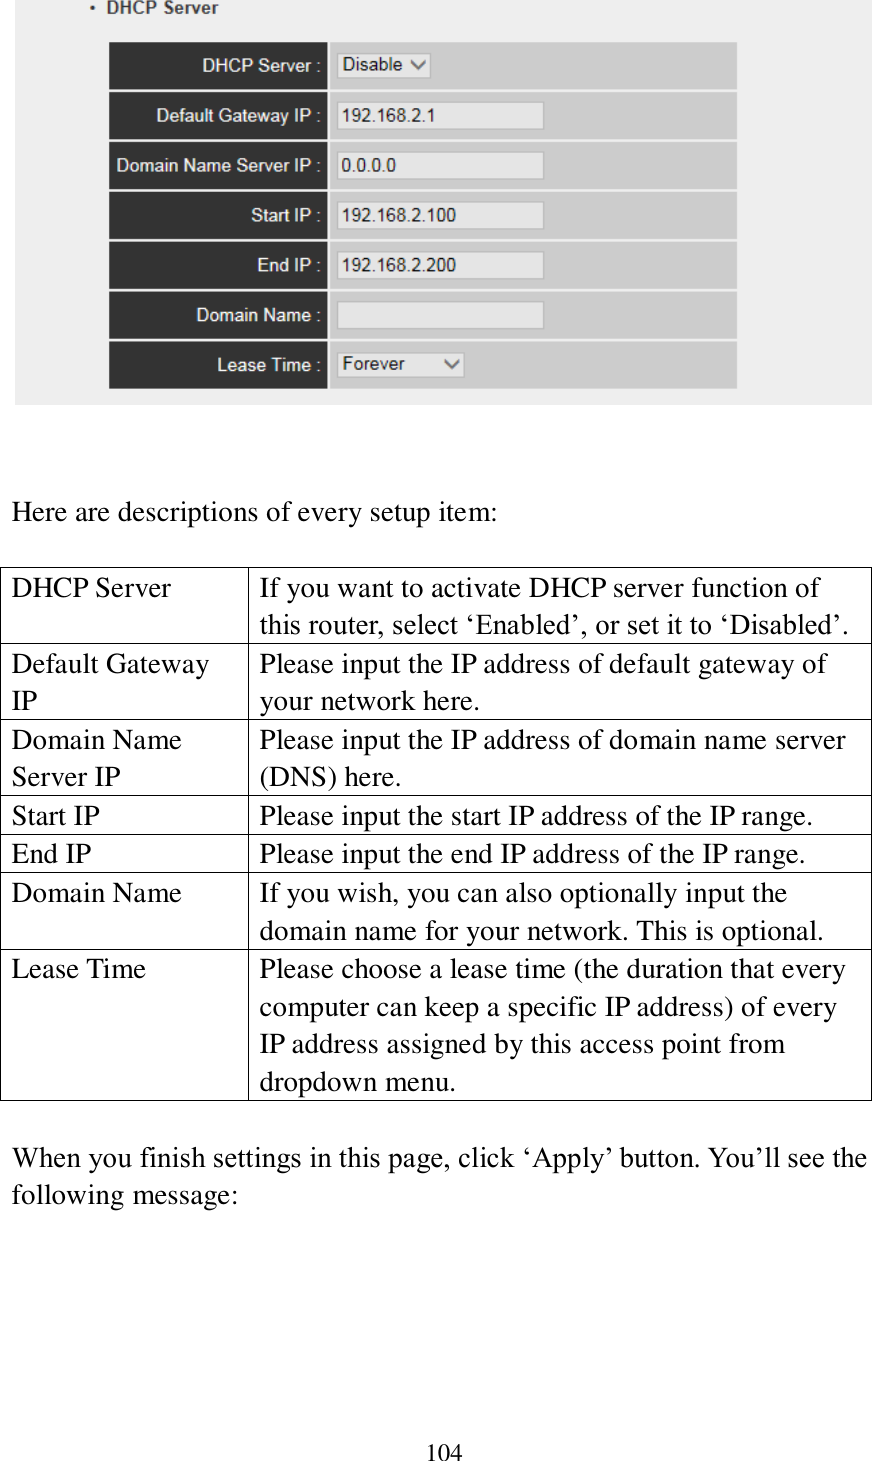 104    Here are descriptions of every setup item:  DHCP Server If you want to activate DHCP server function of this router, select ‘Enabled’, or set it to ‘Disabled’. Default Gateway IP Please input the IP address of default gateway of your network here. Domain Name Server IP Please input the IP address of domain name server (DNS) here. Start IP Please input the start IP address of the IP range. End IP Please input the end IP address of the IP range. Domain Name If you wish, you can also optionally input the domain name for your network. This is optional. Lease Time Please choose a lease time (the duration that every computer can keep a specific IP address) of every IP address assigned by this access point from dropdown menu.  When you finish settings in this page, click ‘Apply’ button. You’ll see the following message:  